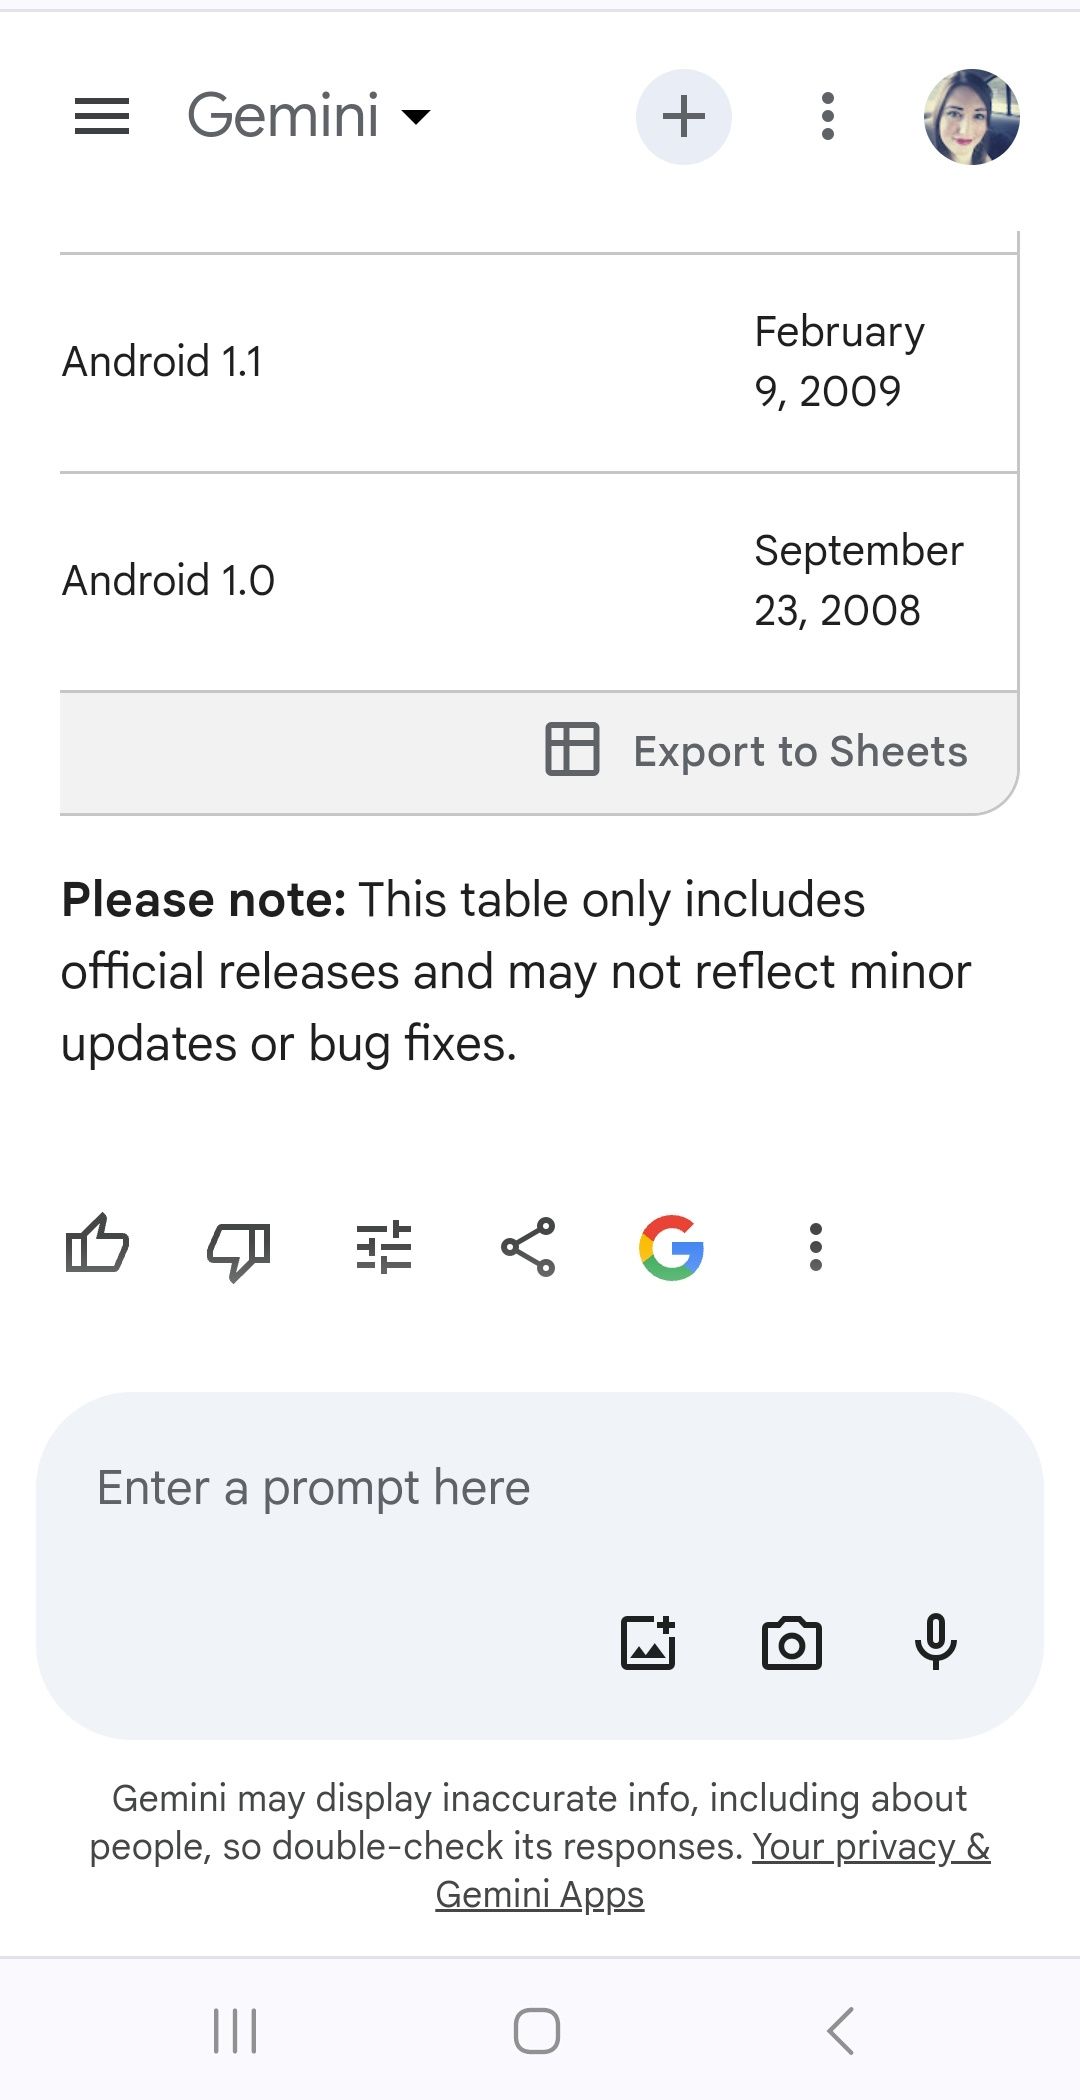 export to sheets button linked to table response